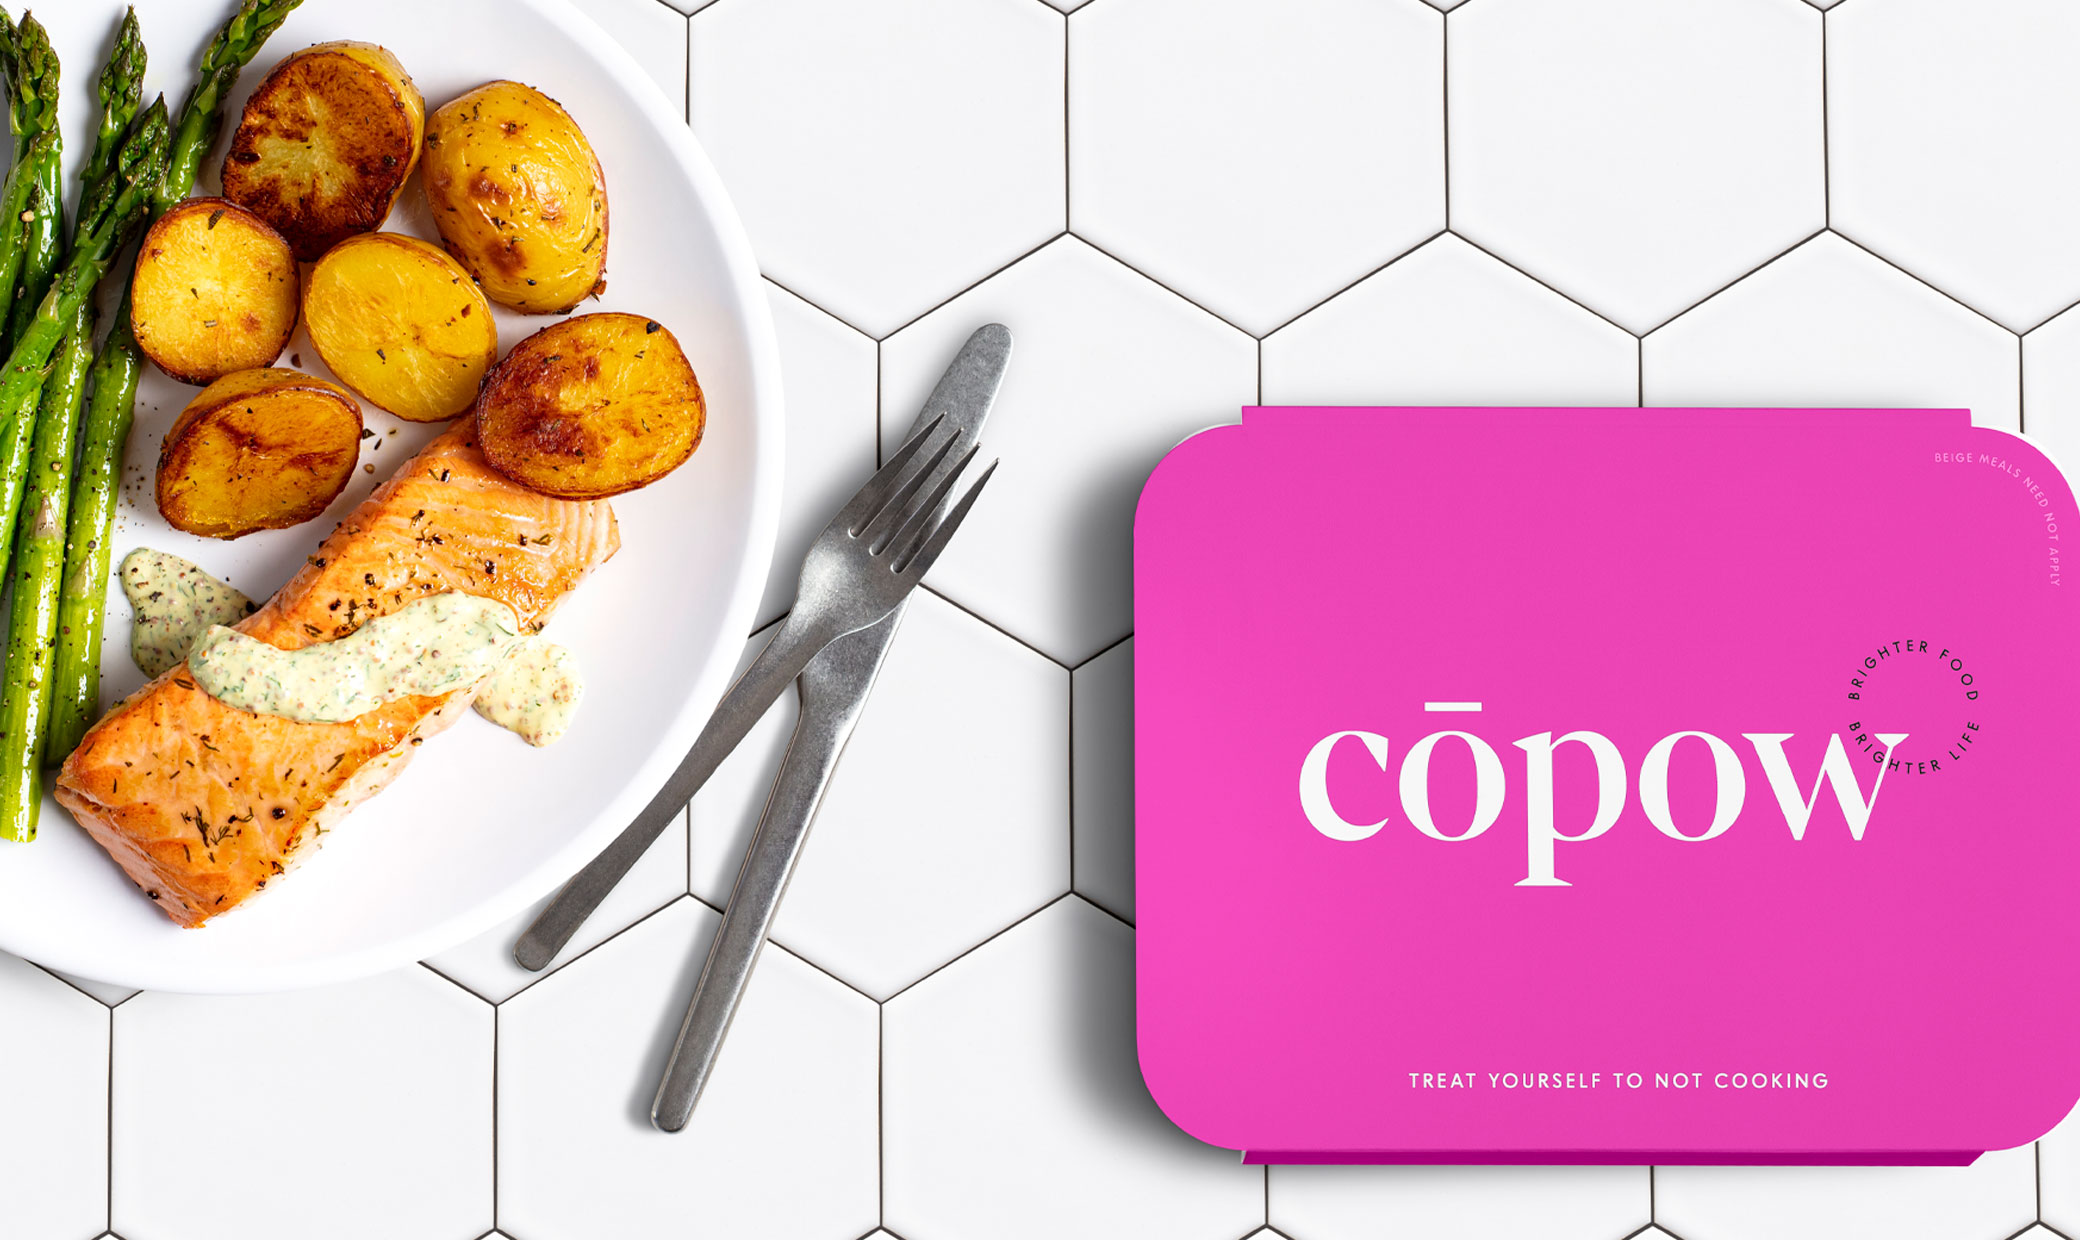 Branding And Packaging Design: Copow Meal Delivery